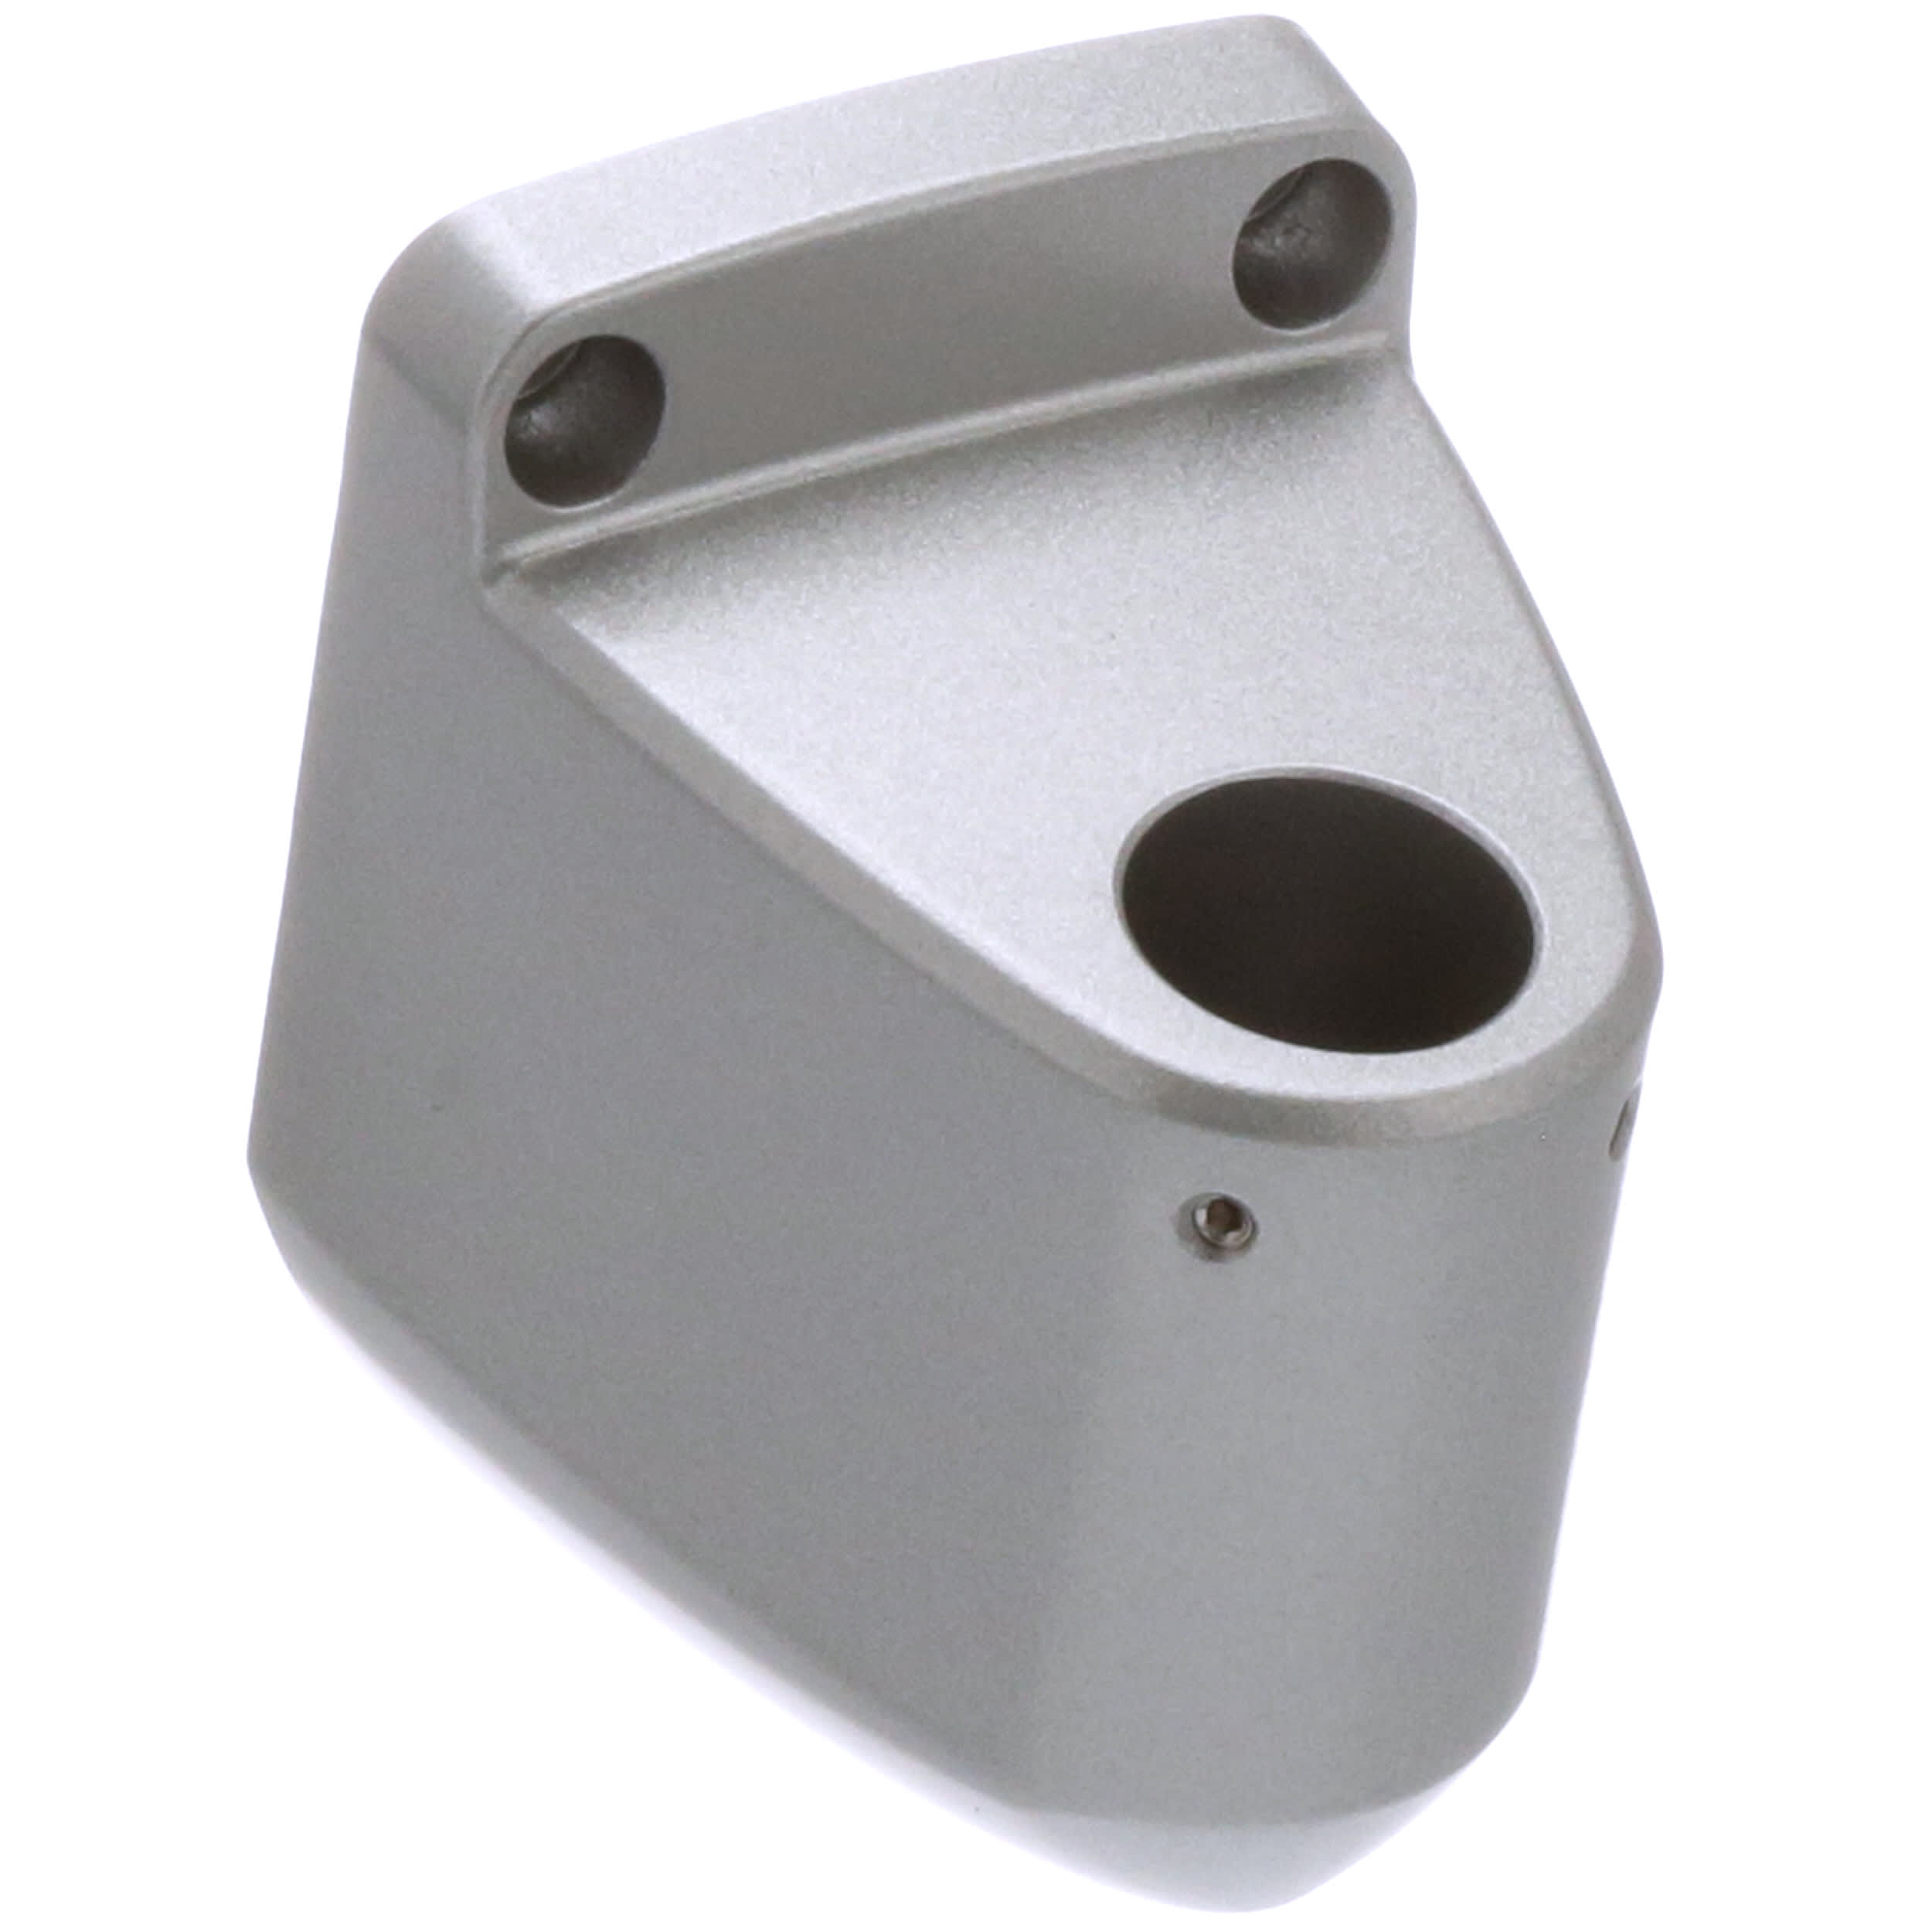 1WX4HX16.5D Inch Details about   Dayton 2YU84 Mounting Brackets 1/pkg Fits KW 7.5 to 20 